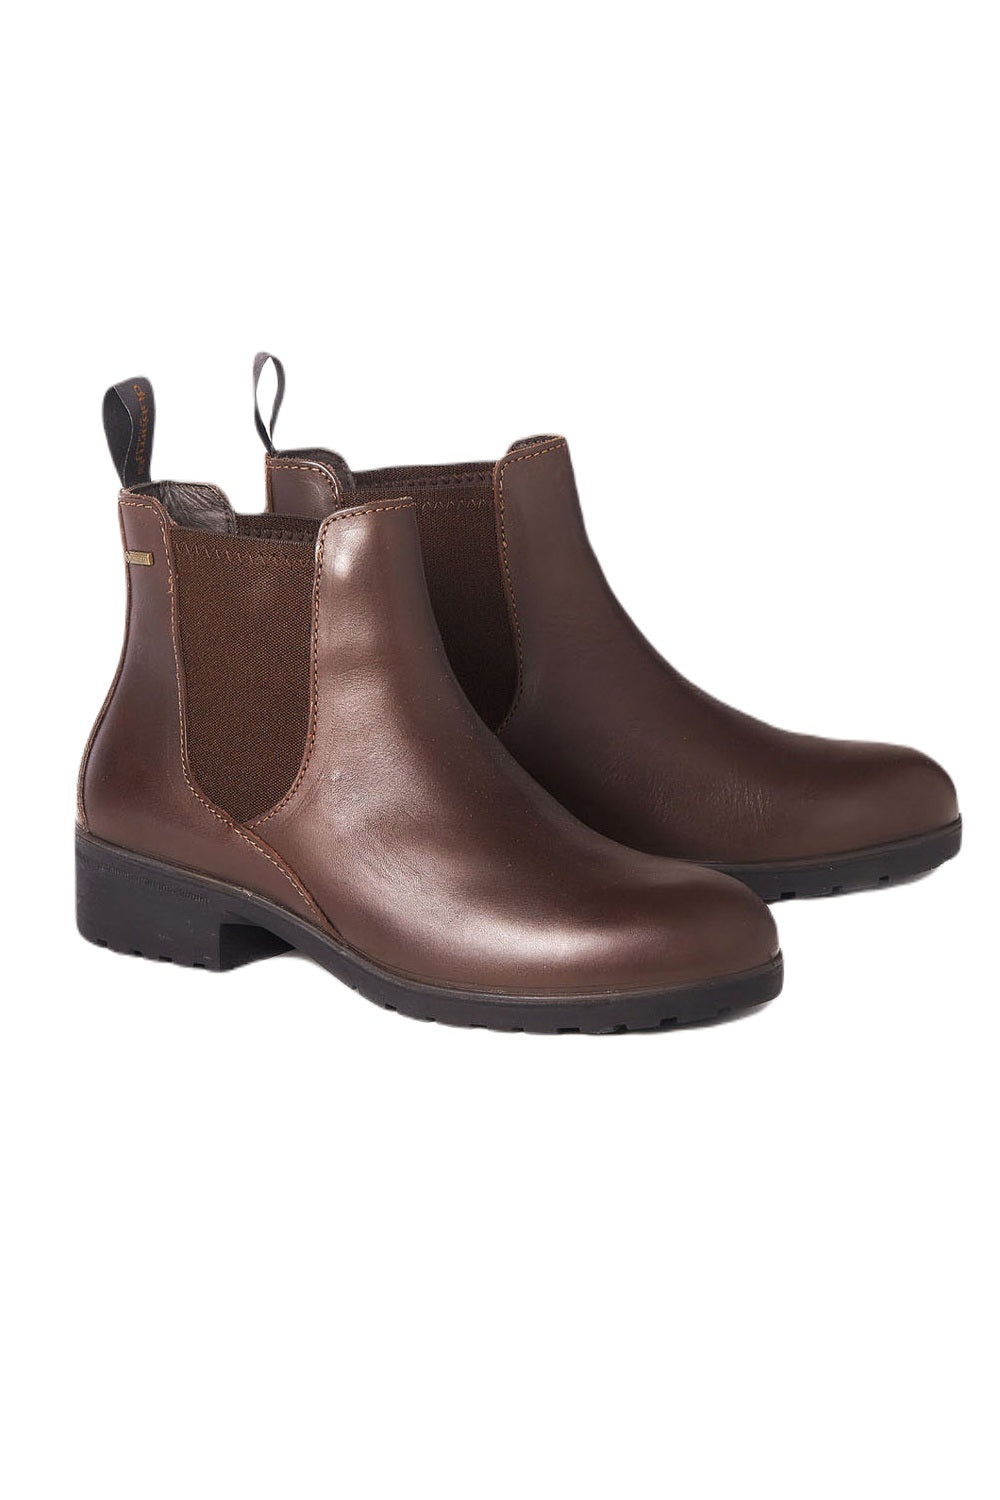 Dubarry Womens Waterford Chelsea Boots in Mahogany 